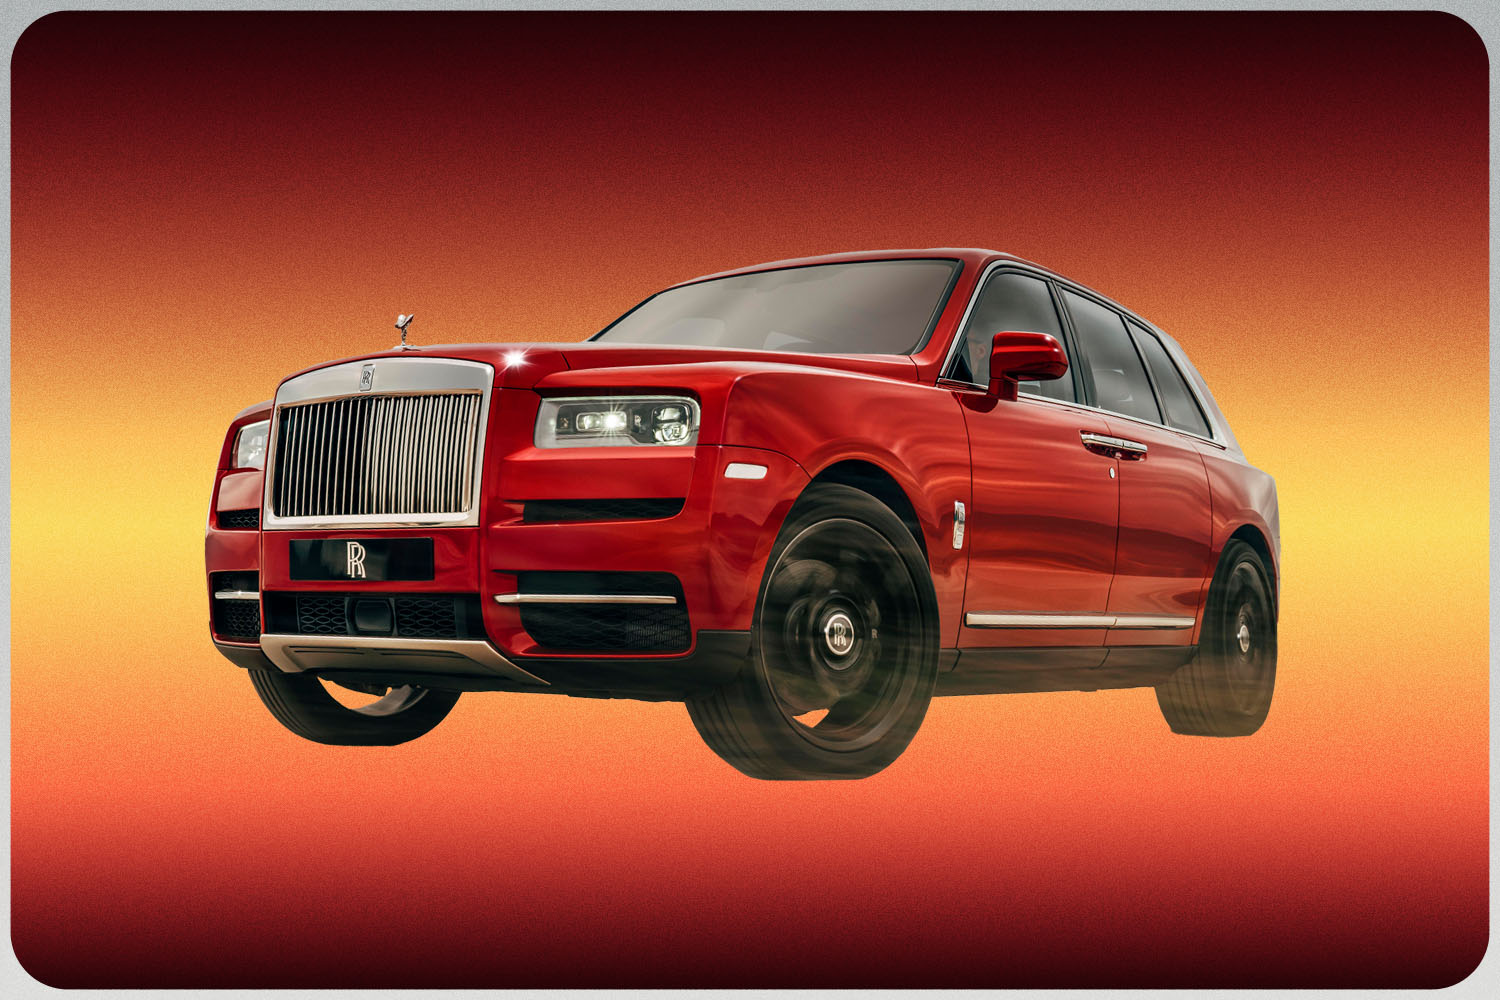 Our Pick for the Best Bespoke Luxury SUV: 2022 Rolls-Royce Cullinan in Red